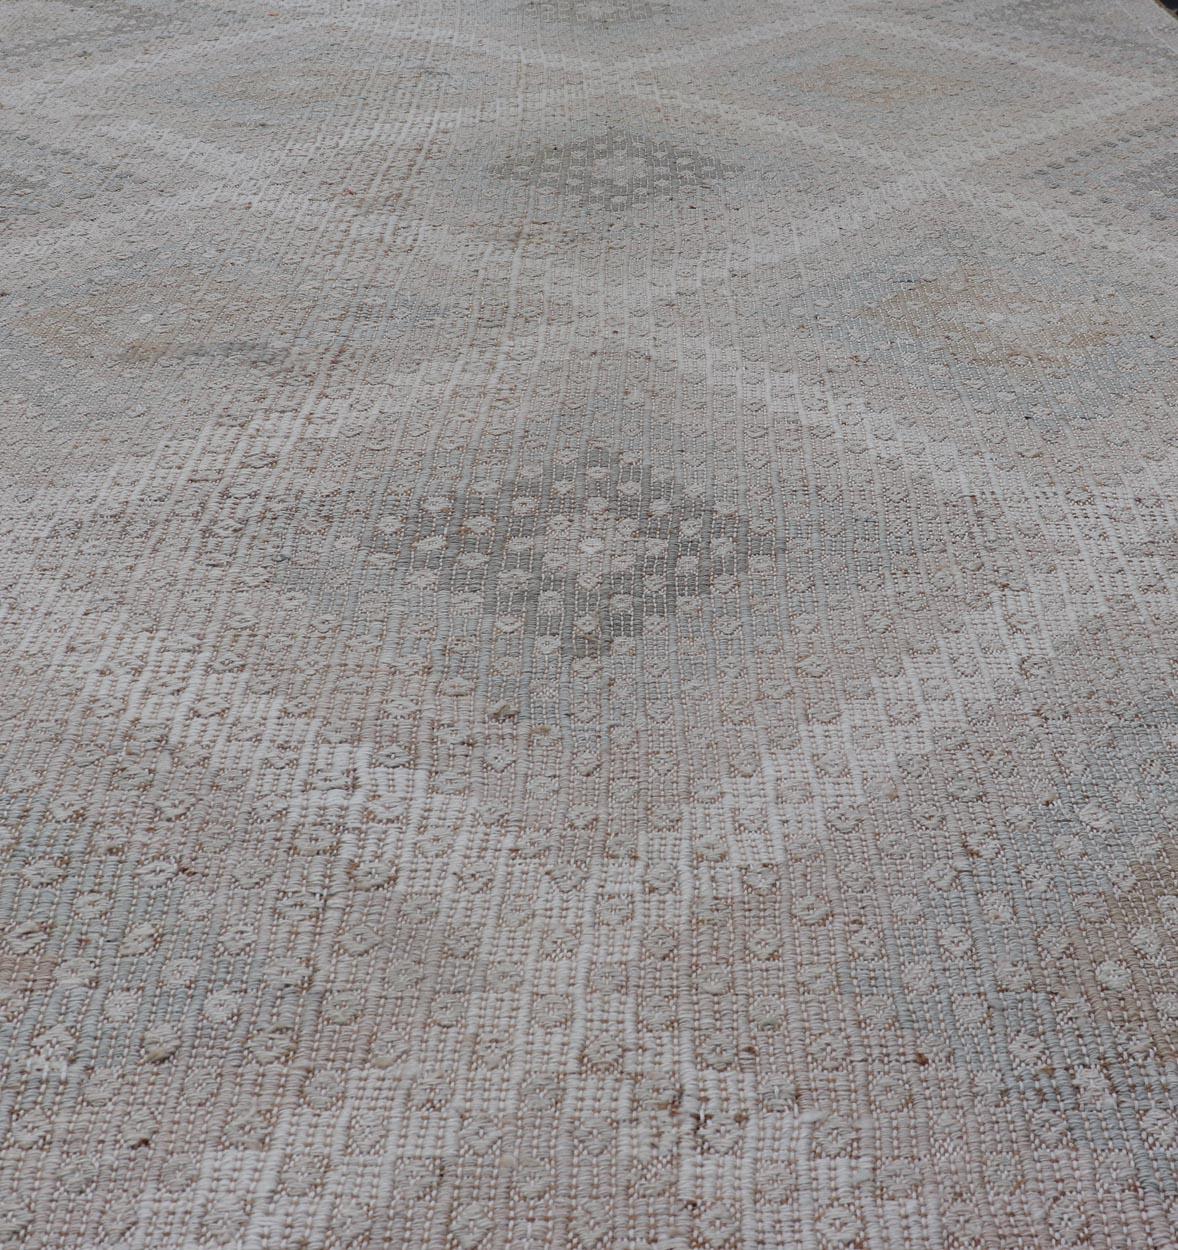 20th Century Vintage Turkish Flat-Weave Embroidered Rug with Geometric Diamond Design For Sale